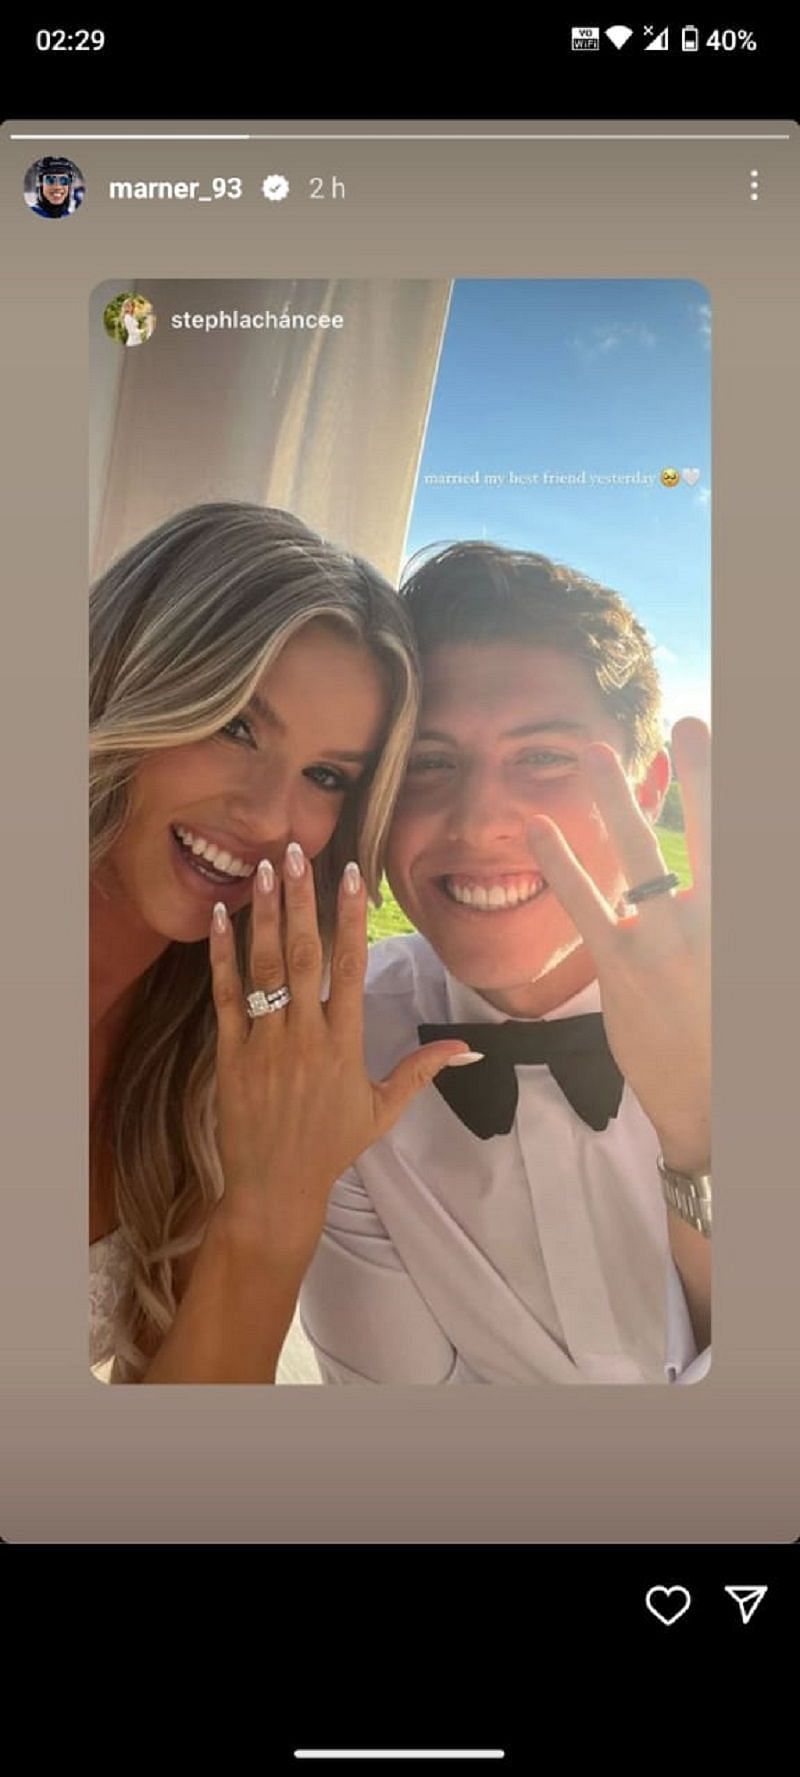 Toronto Maple Leafs forward Mitch Marner and his long-time partner Stephanie LaChance